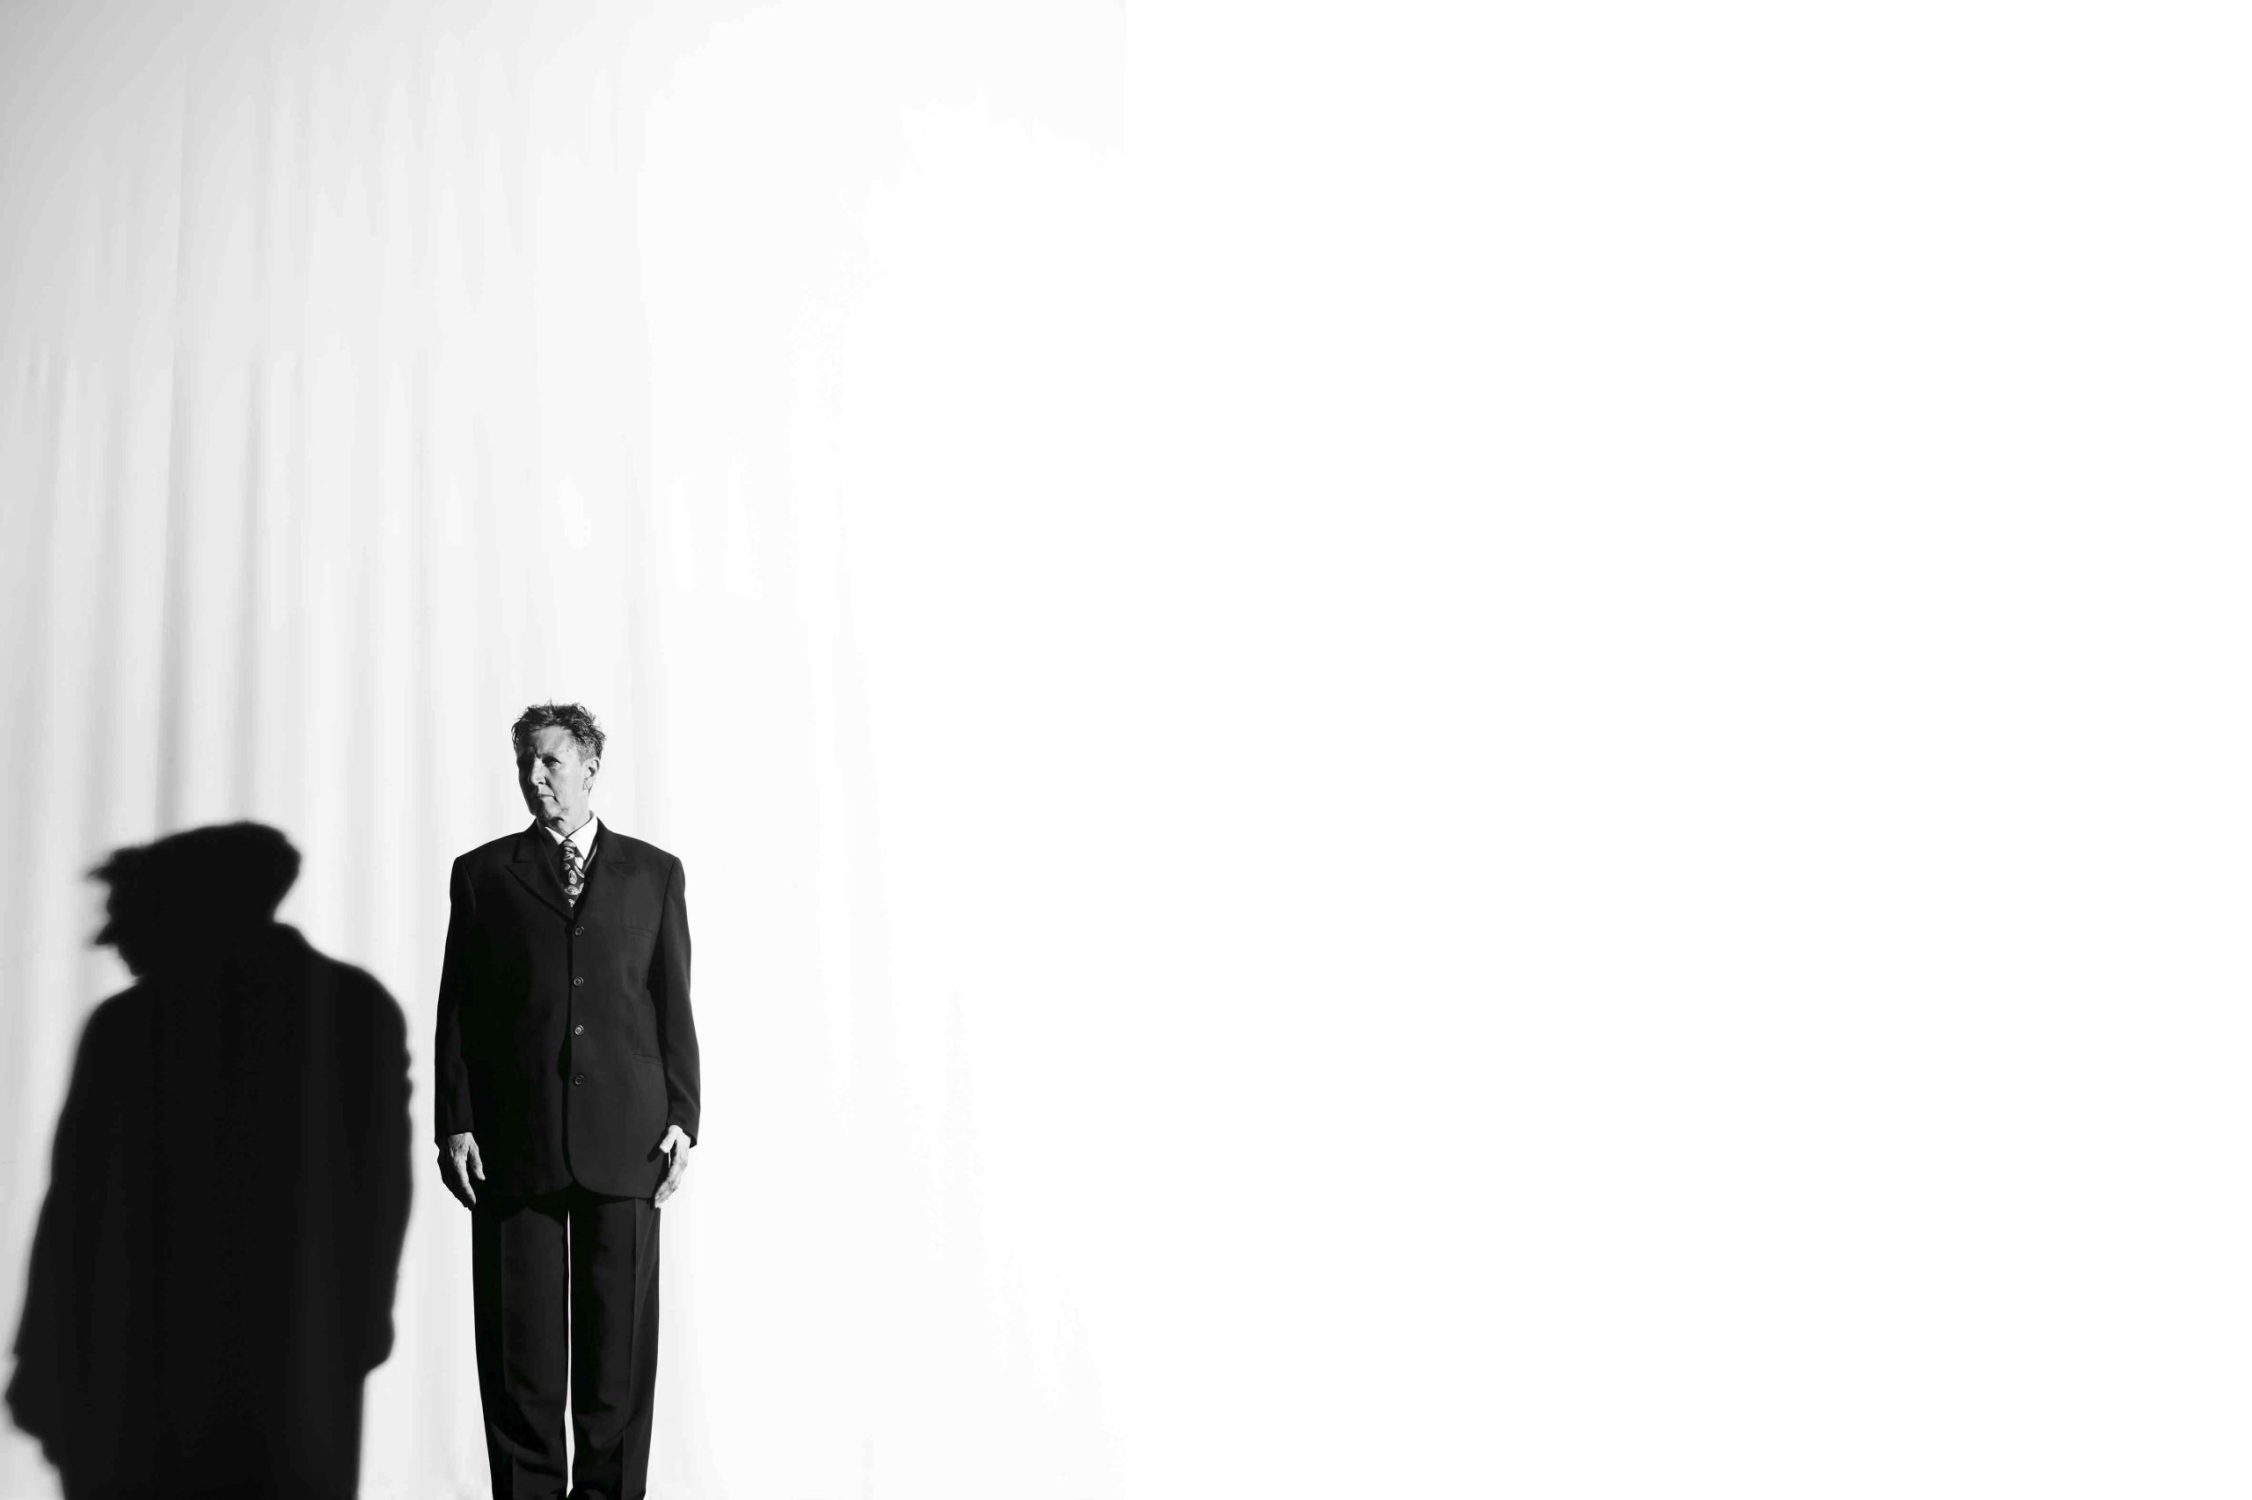 Associate Artist Peggy Shaw dressed in a black suit to the left of the photo looking away from the camera against a white background. Her shadow is seen beside her.